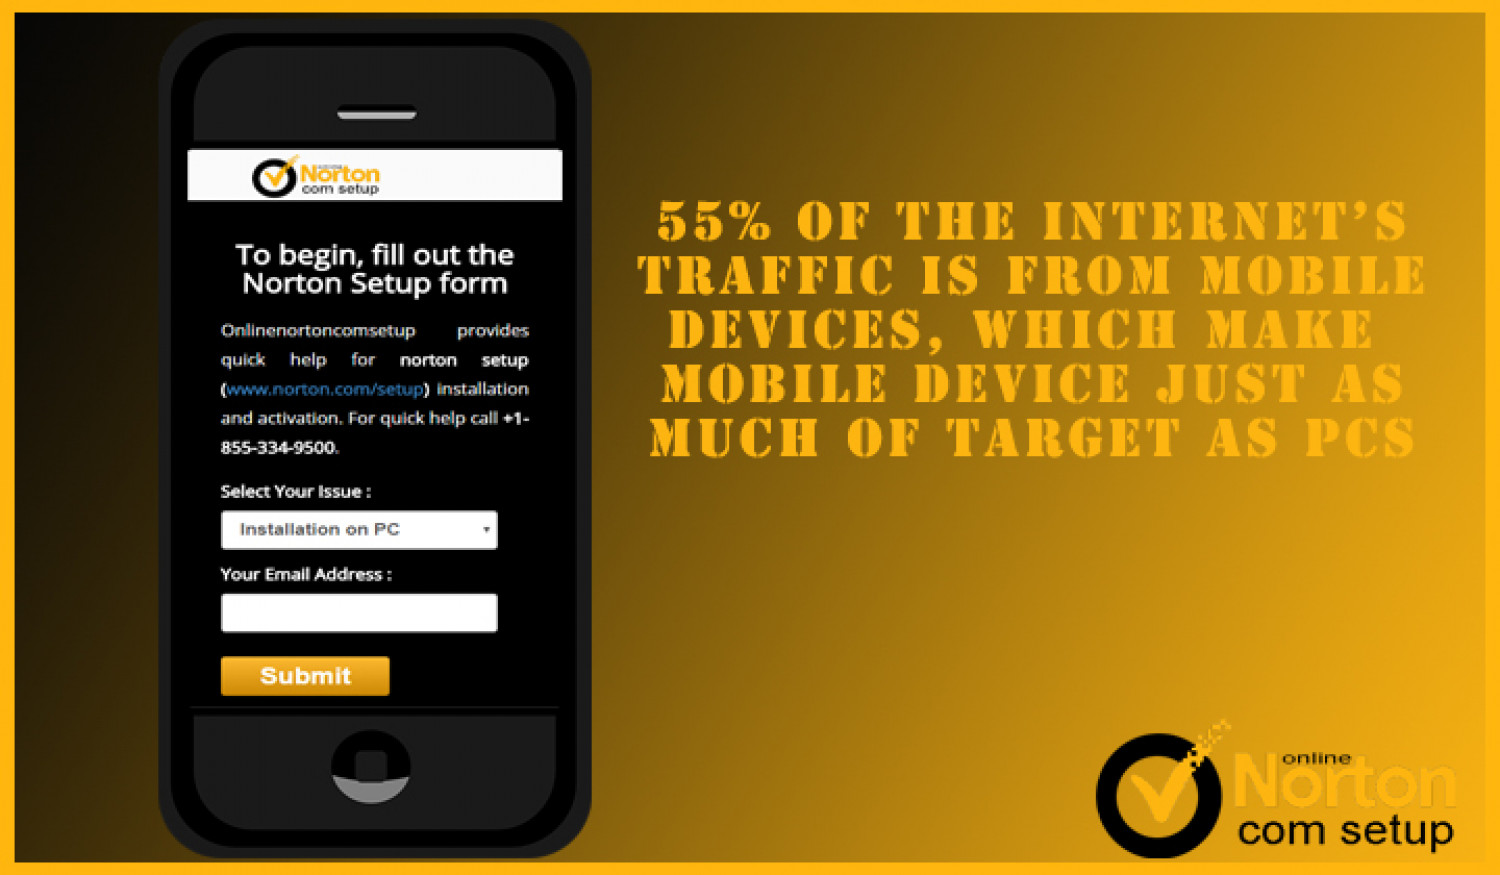 Norton Mobile Security Infographic